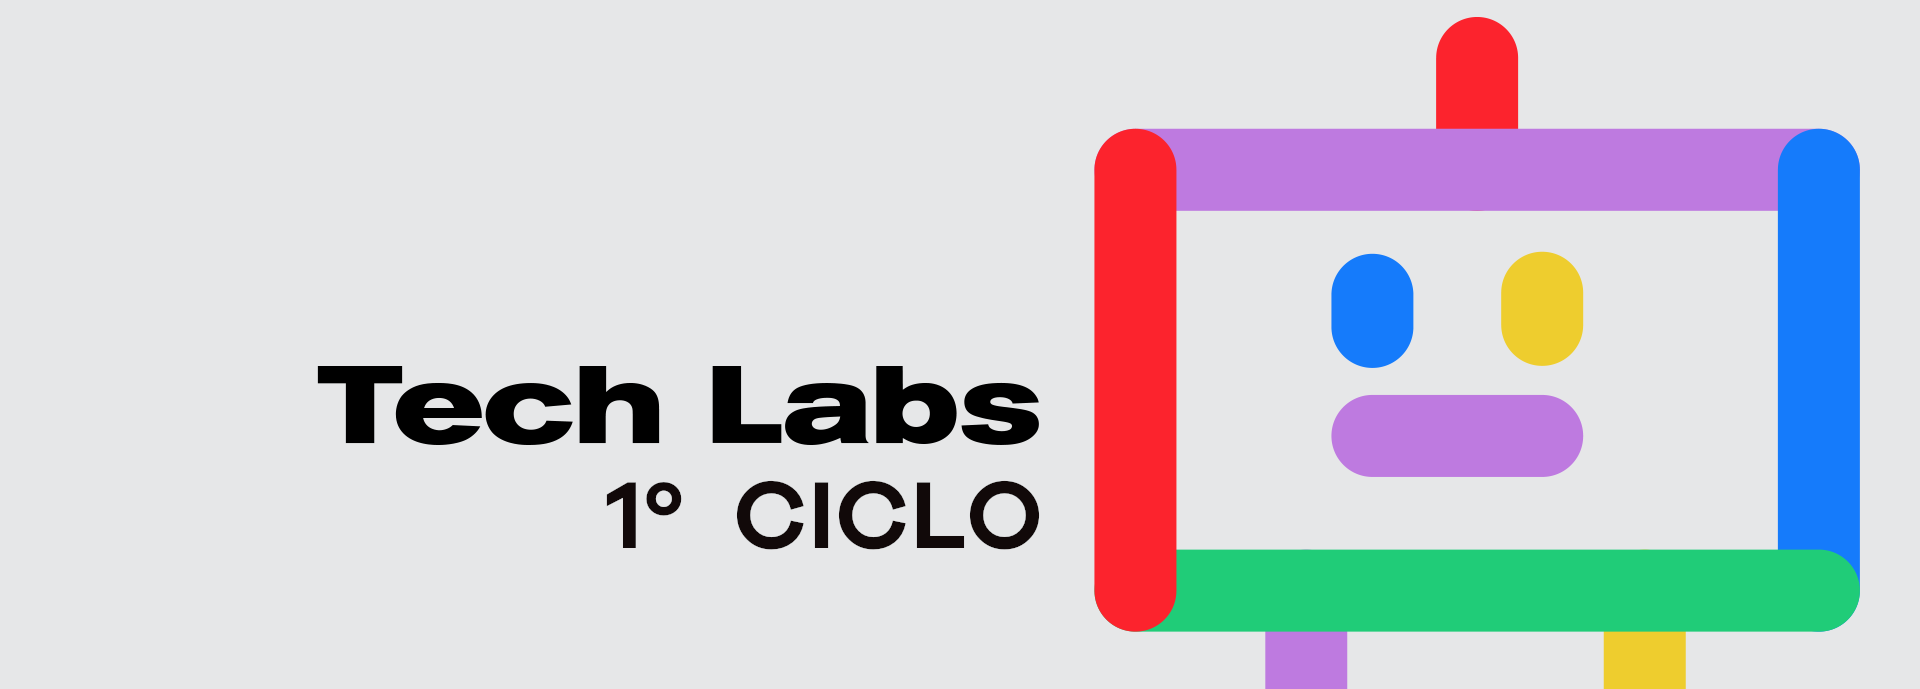 TechLabs_Header_1ciclo.png